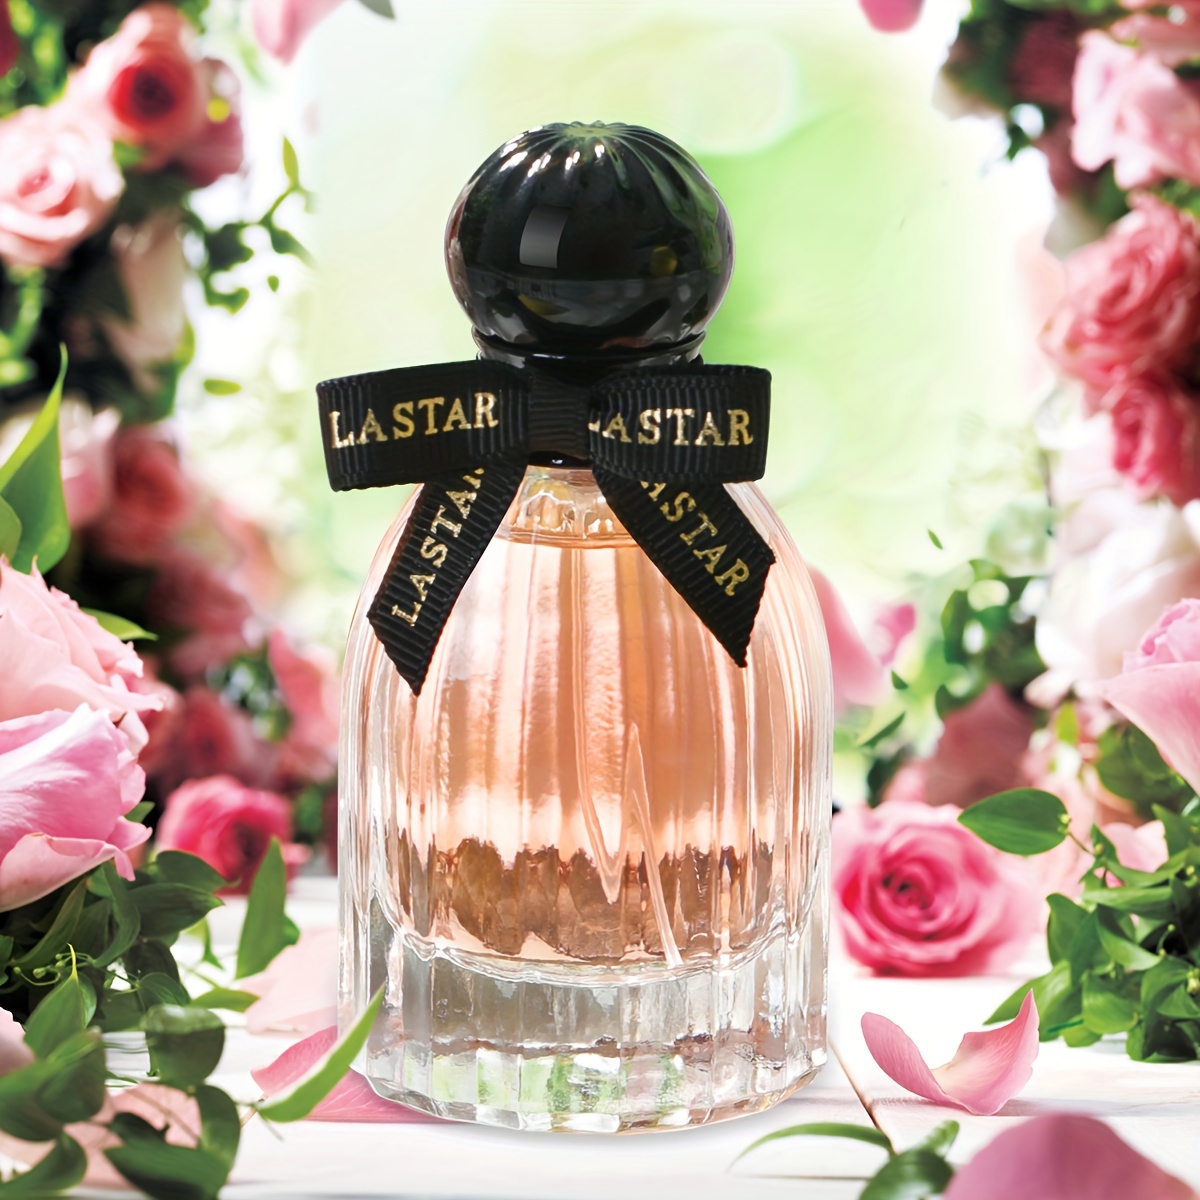 Gifts for Her, Fragrances for Women